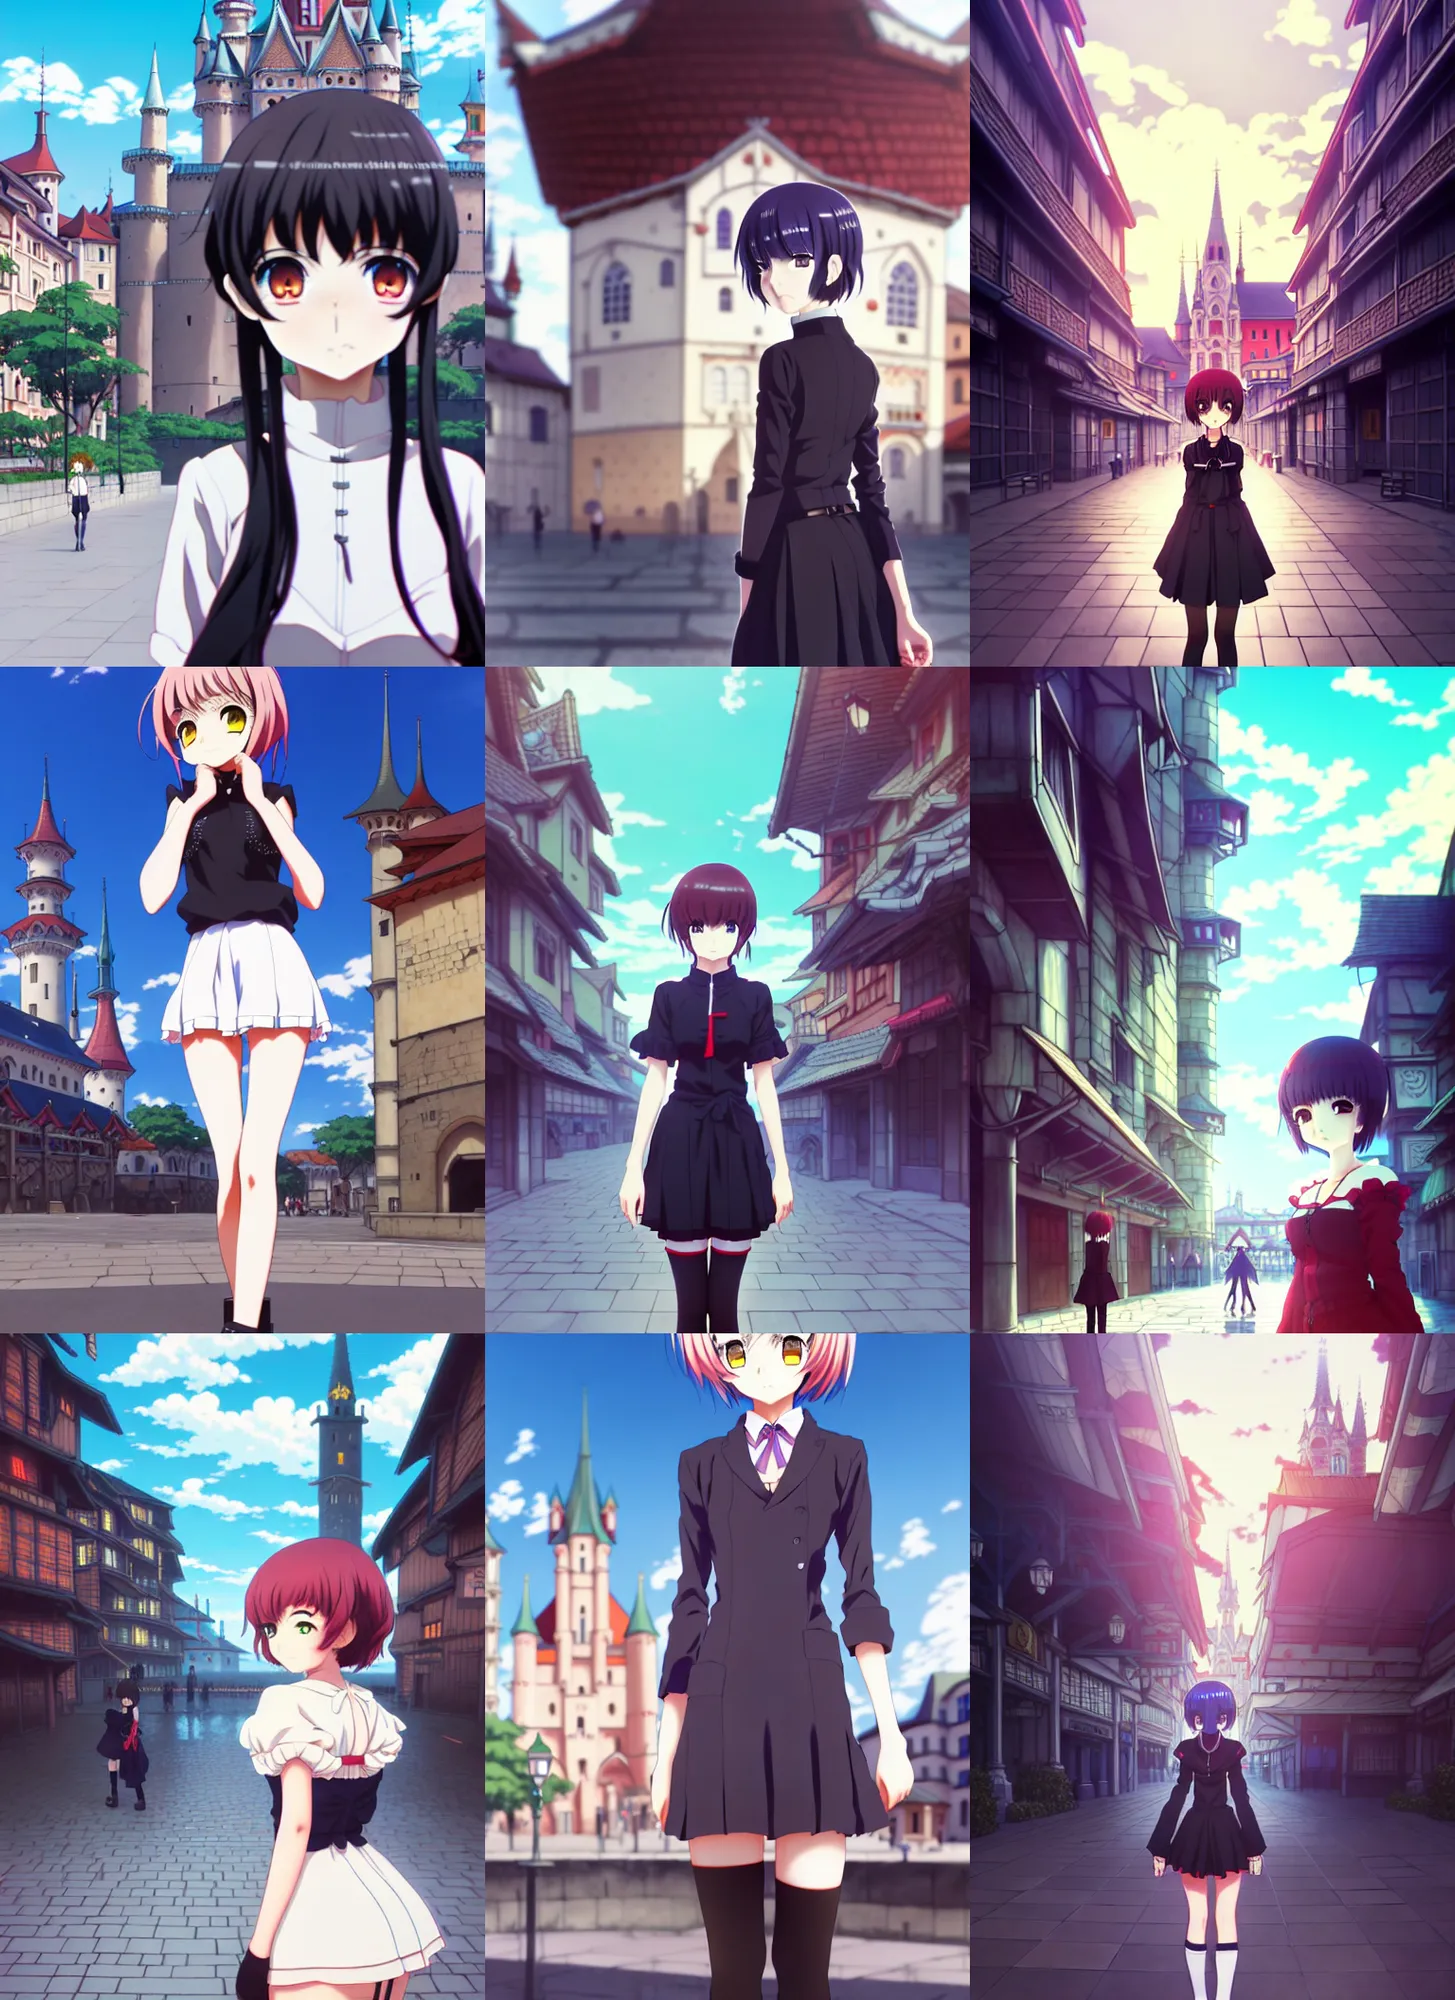 Prompt: anime frames, anime visual, full body portrait of a young woman in the medieval city square looking at the fantasy palace in the distance, cute face by ilya kuvshinov, akihiro yoshida, dynamic pose, dynamic perspective, rounded eyes, moody, psycho pass, kyoani, yoh yoshinari